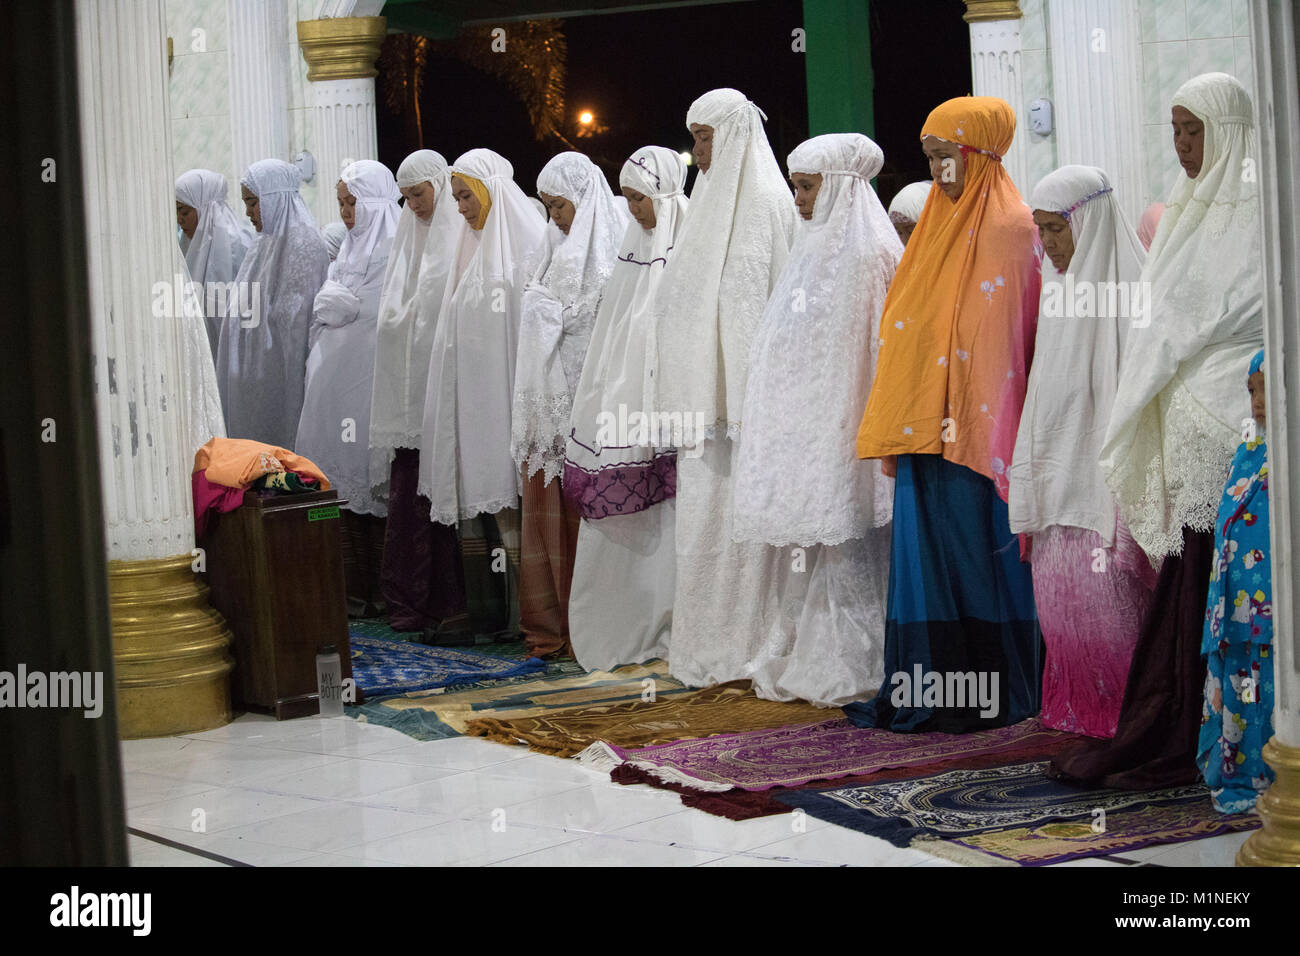 Banda Aceh, Indonesia. 31st Jan, 2018. Acehnese people praying during the super blue blood moon phenomenon in a mosque in Aceh province, Indonesia. Credit: Abdul Hadi Firsawan/Pacific Press/Alamy Live News Stock Photo